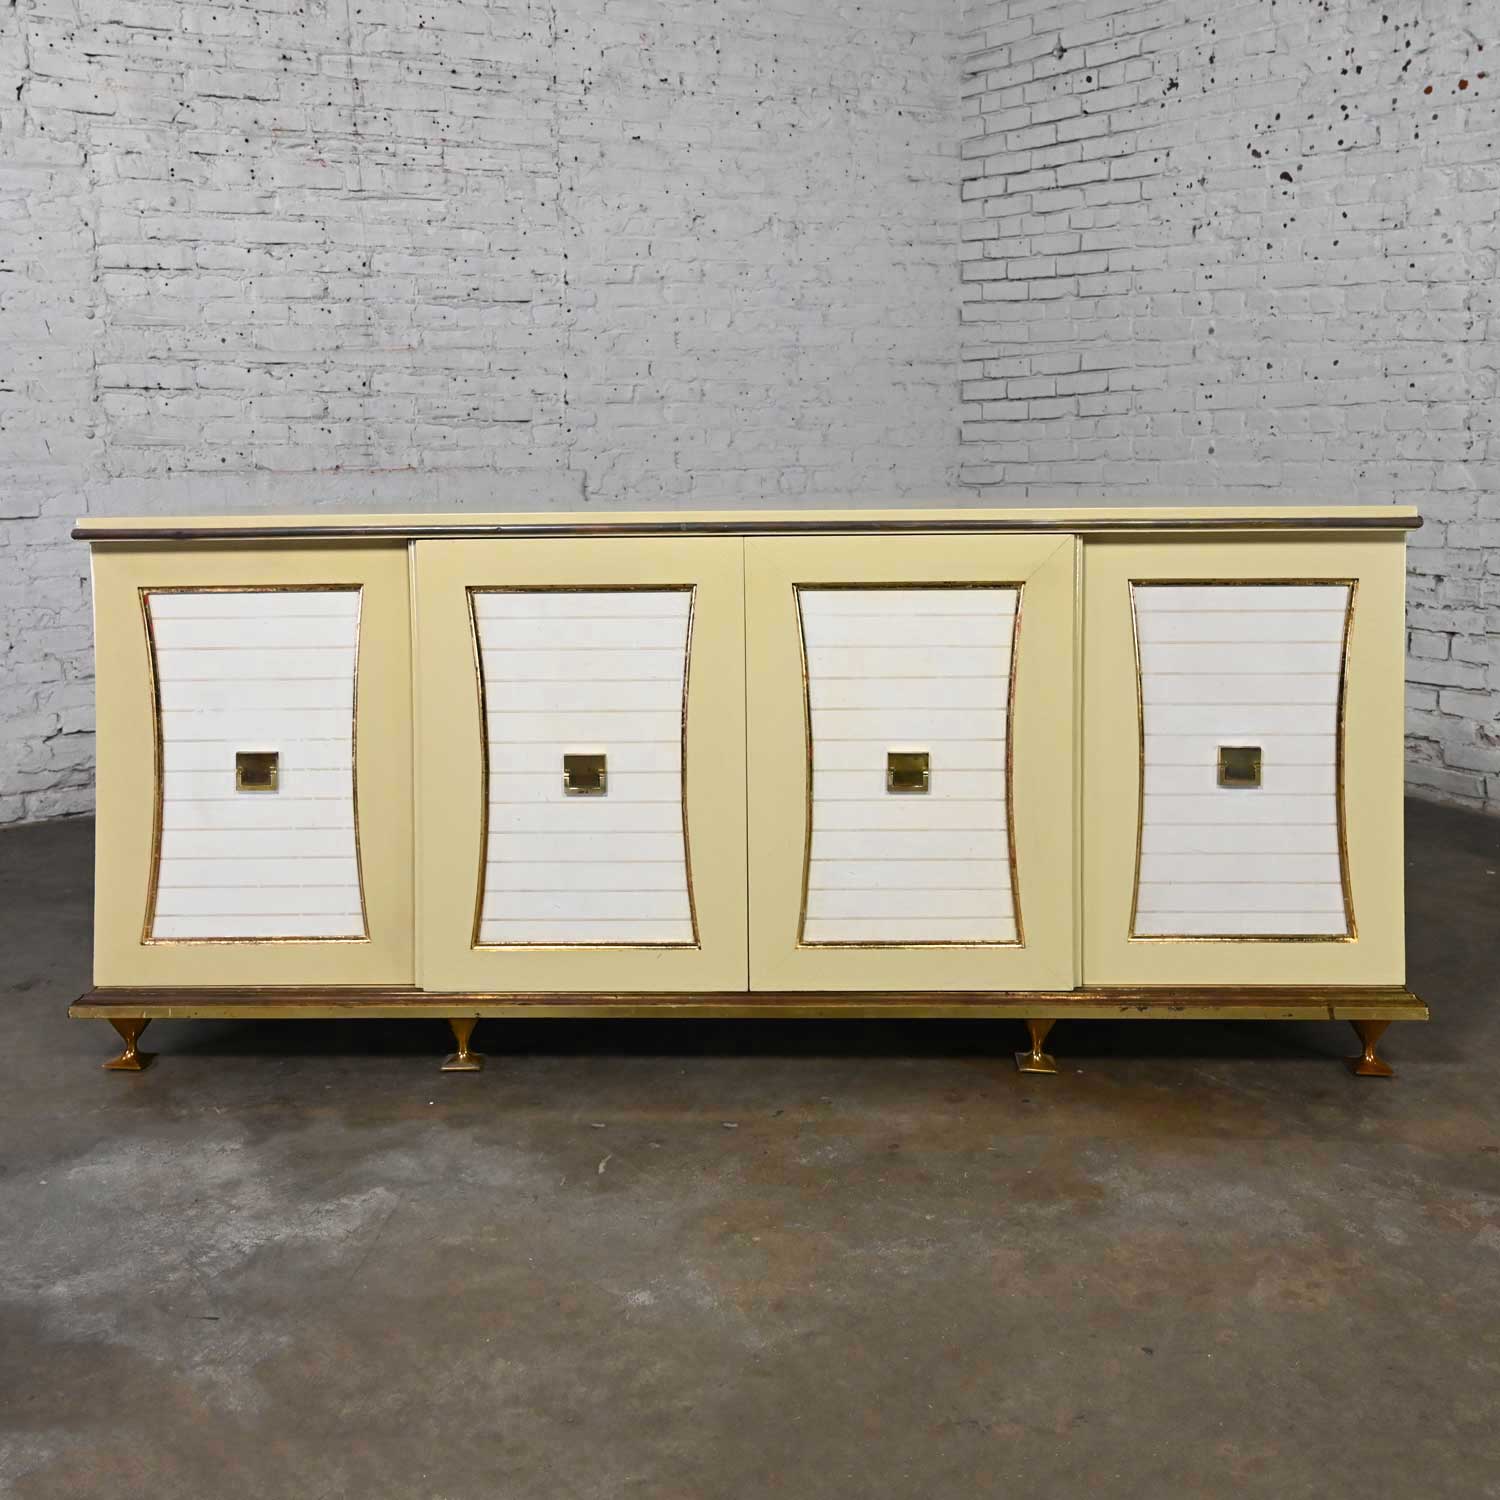 Mid-20th Century Hollywood Regency Credenza or Dresser by Renzo Rutili for Johnson Furniture